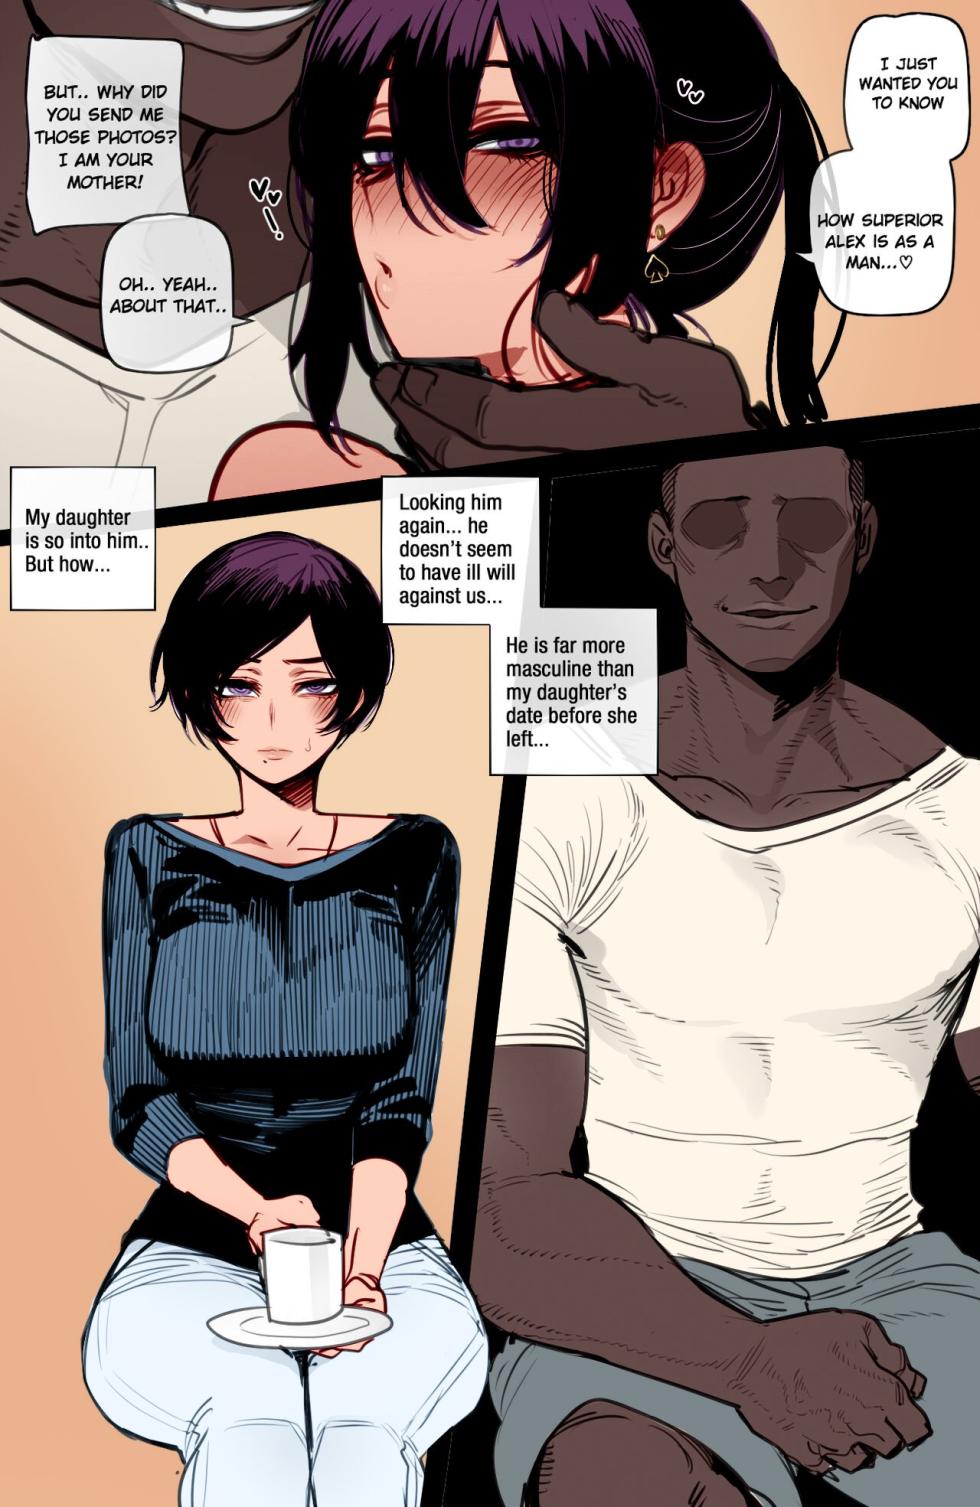 [Ratatatat74] Mother and Daughter BBC Corruption [Colorized] [English] (Ongoing) - Page 6